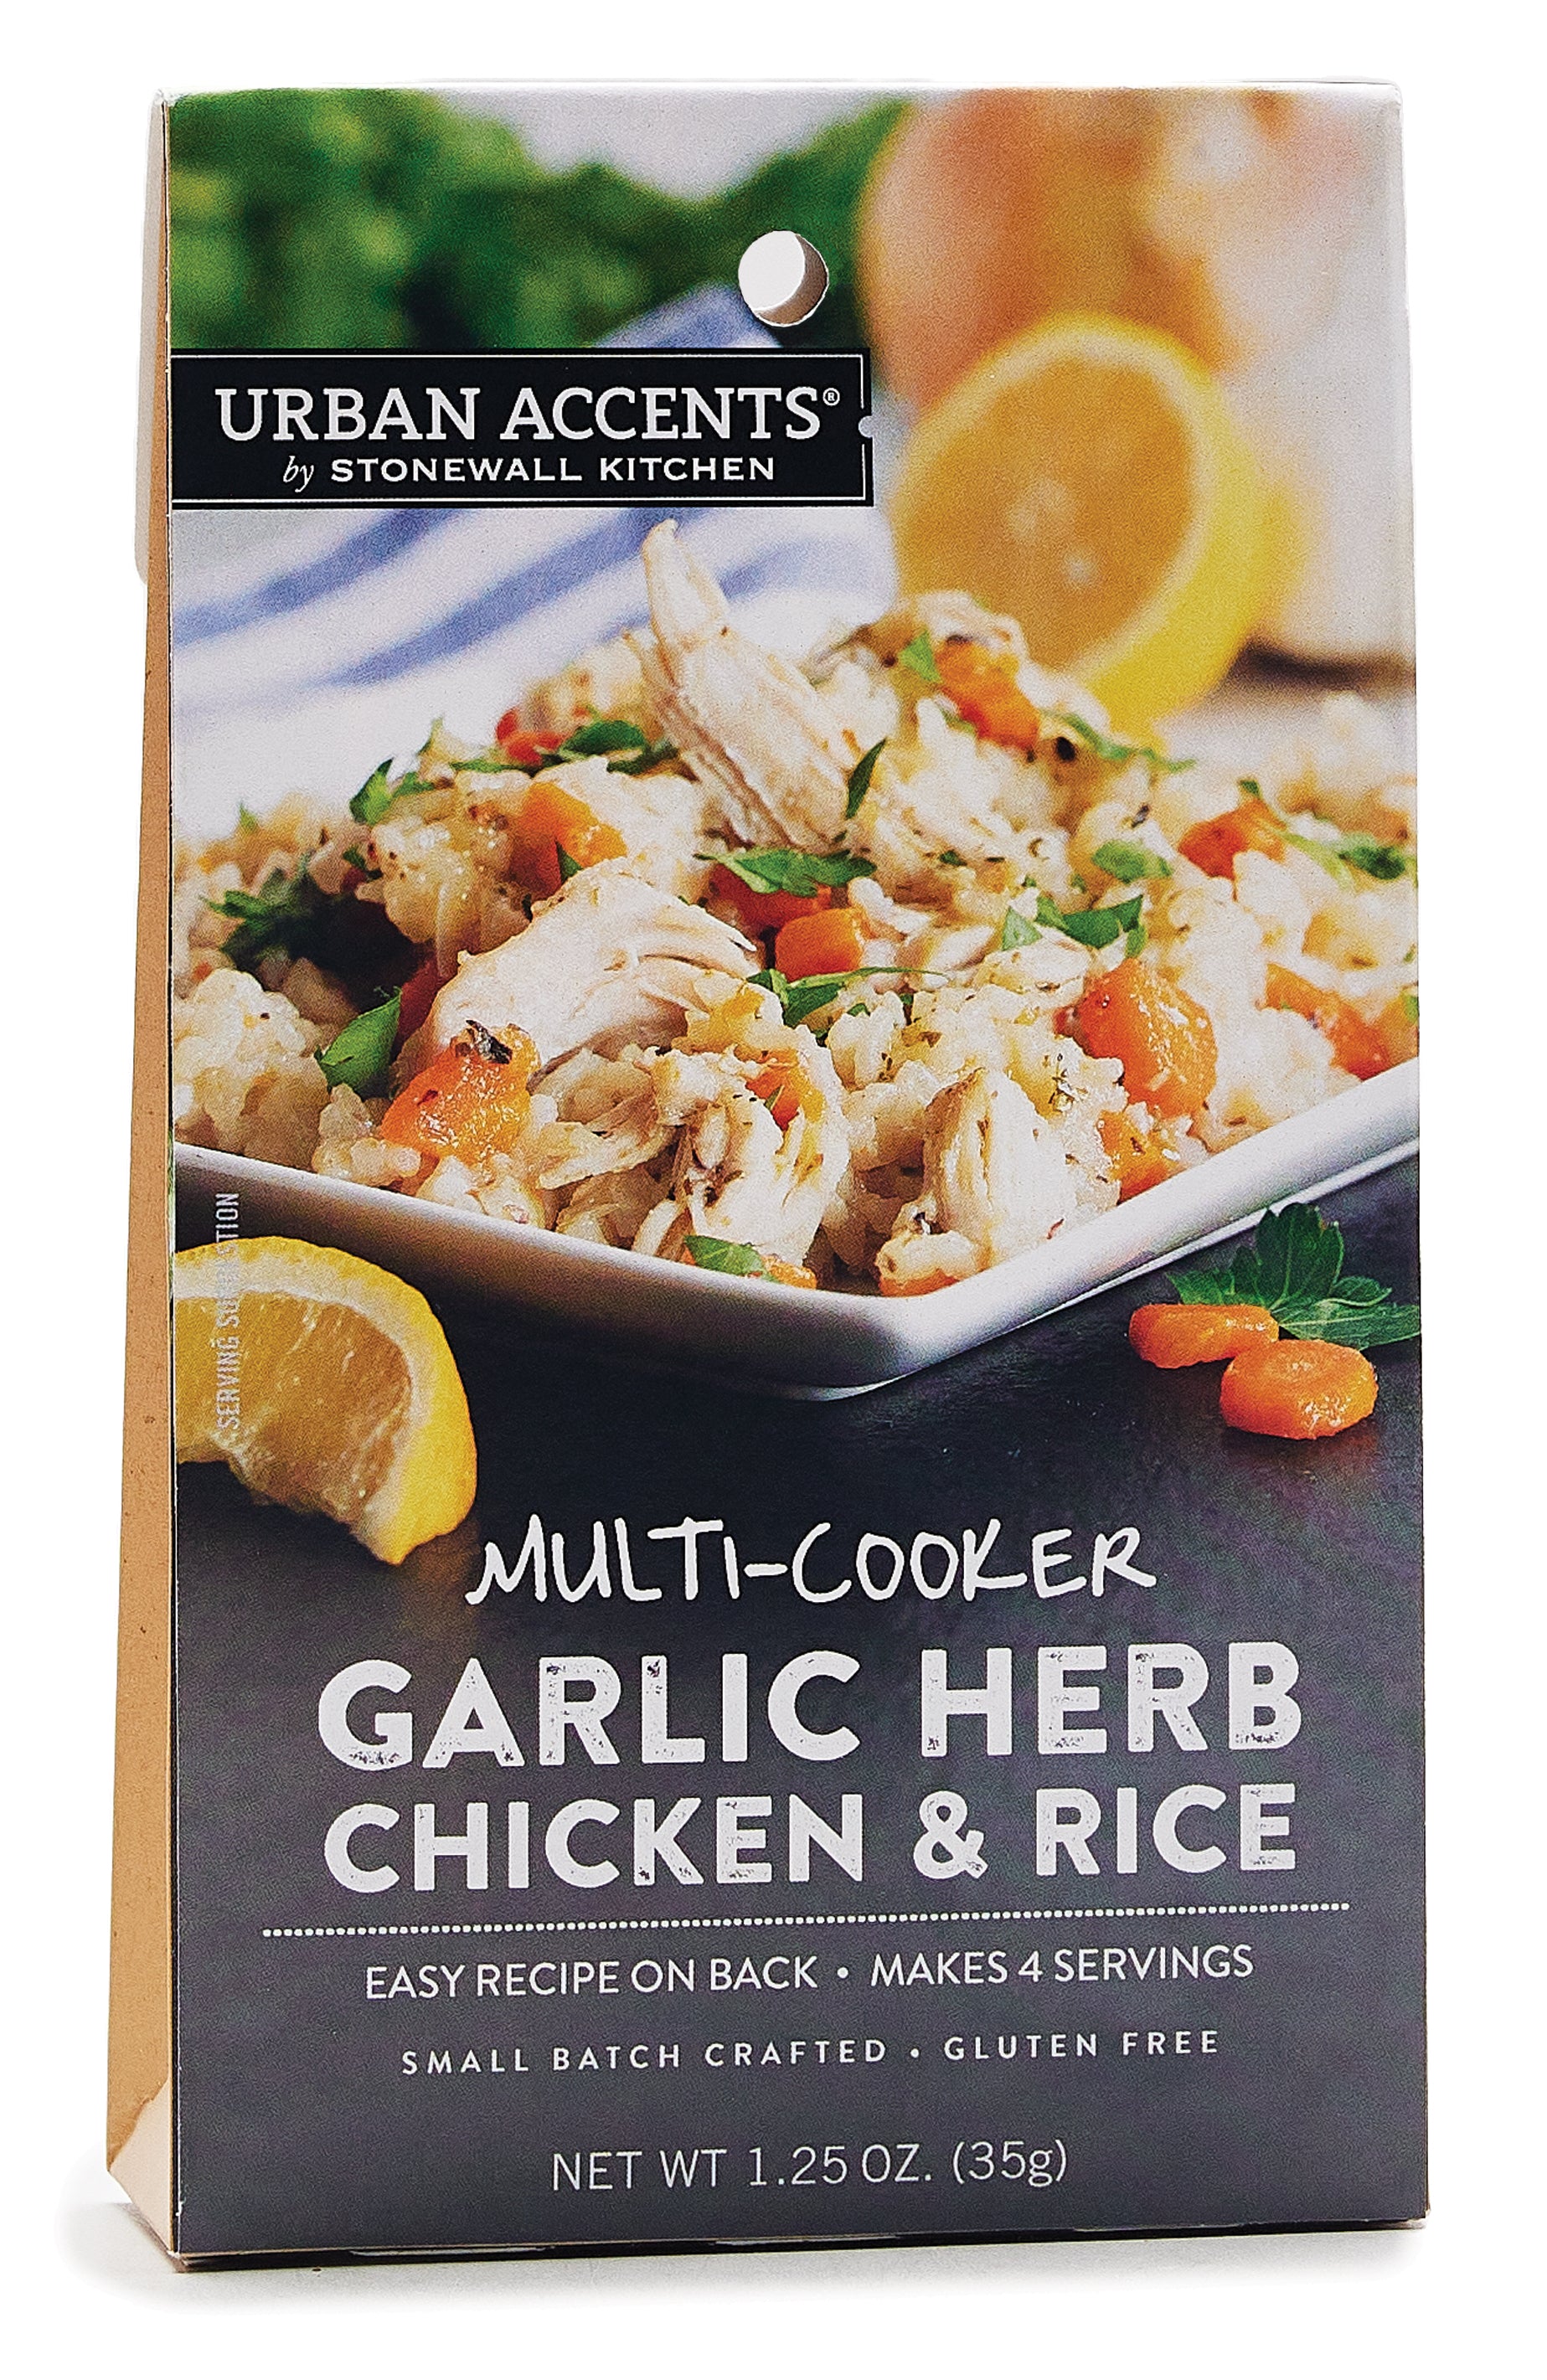 Urban Accents Garlic Herb Chicken and Rice - Olive Oil Etcetera 